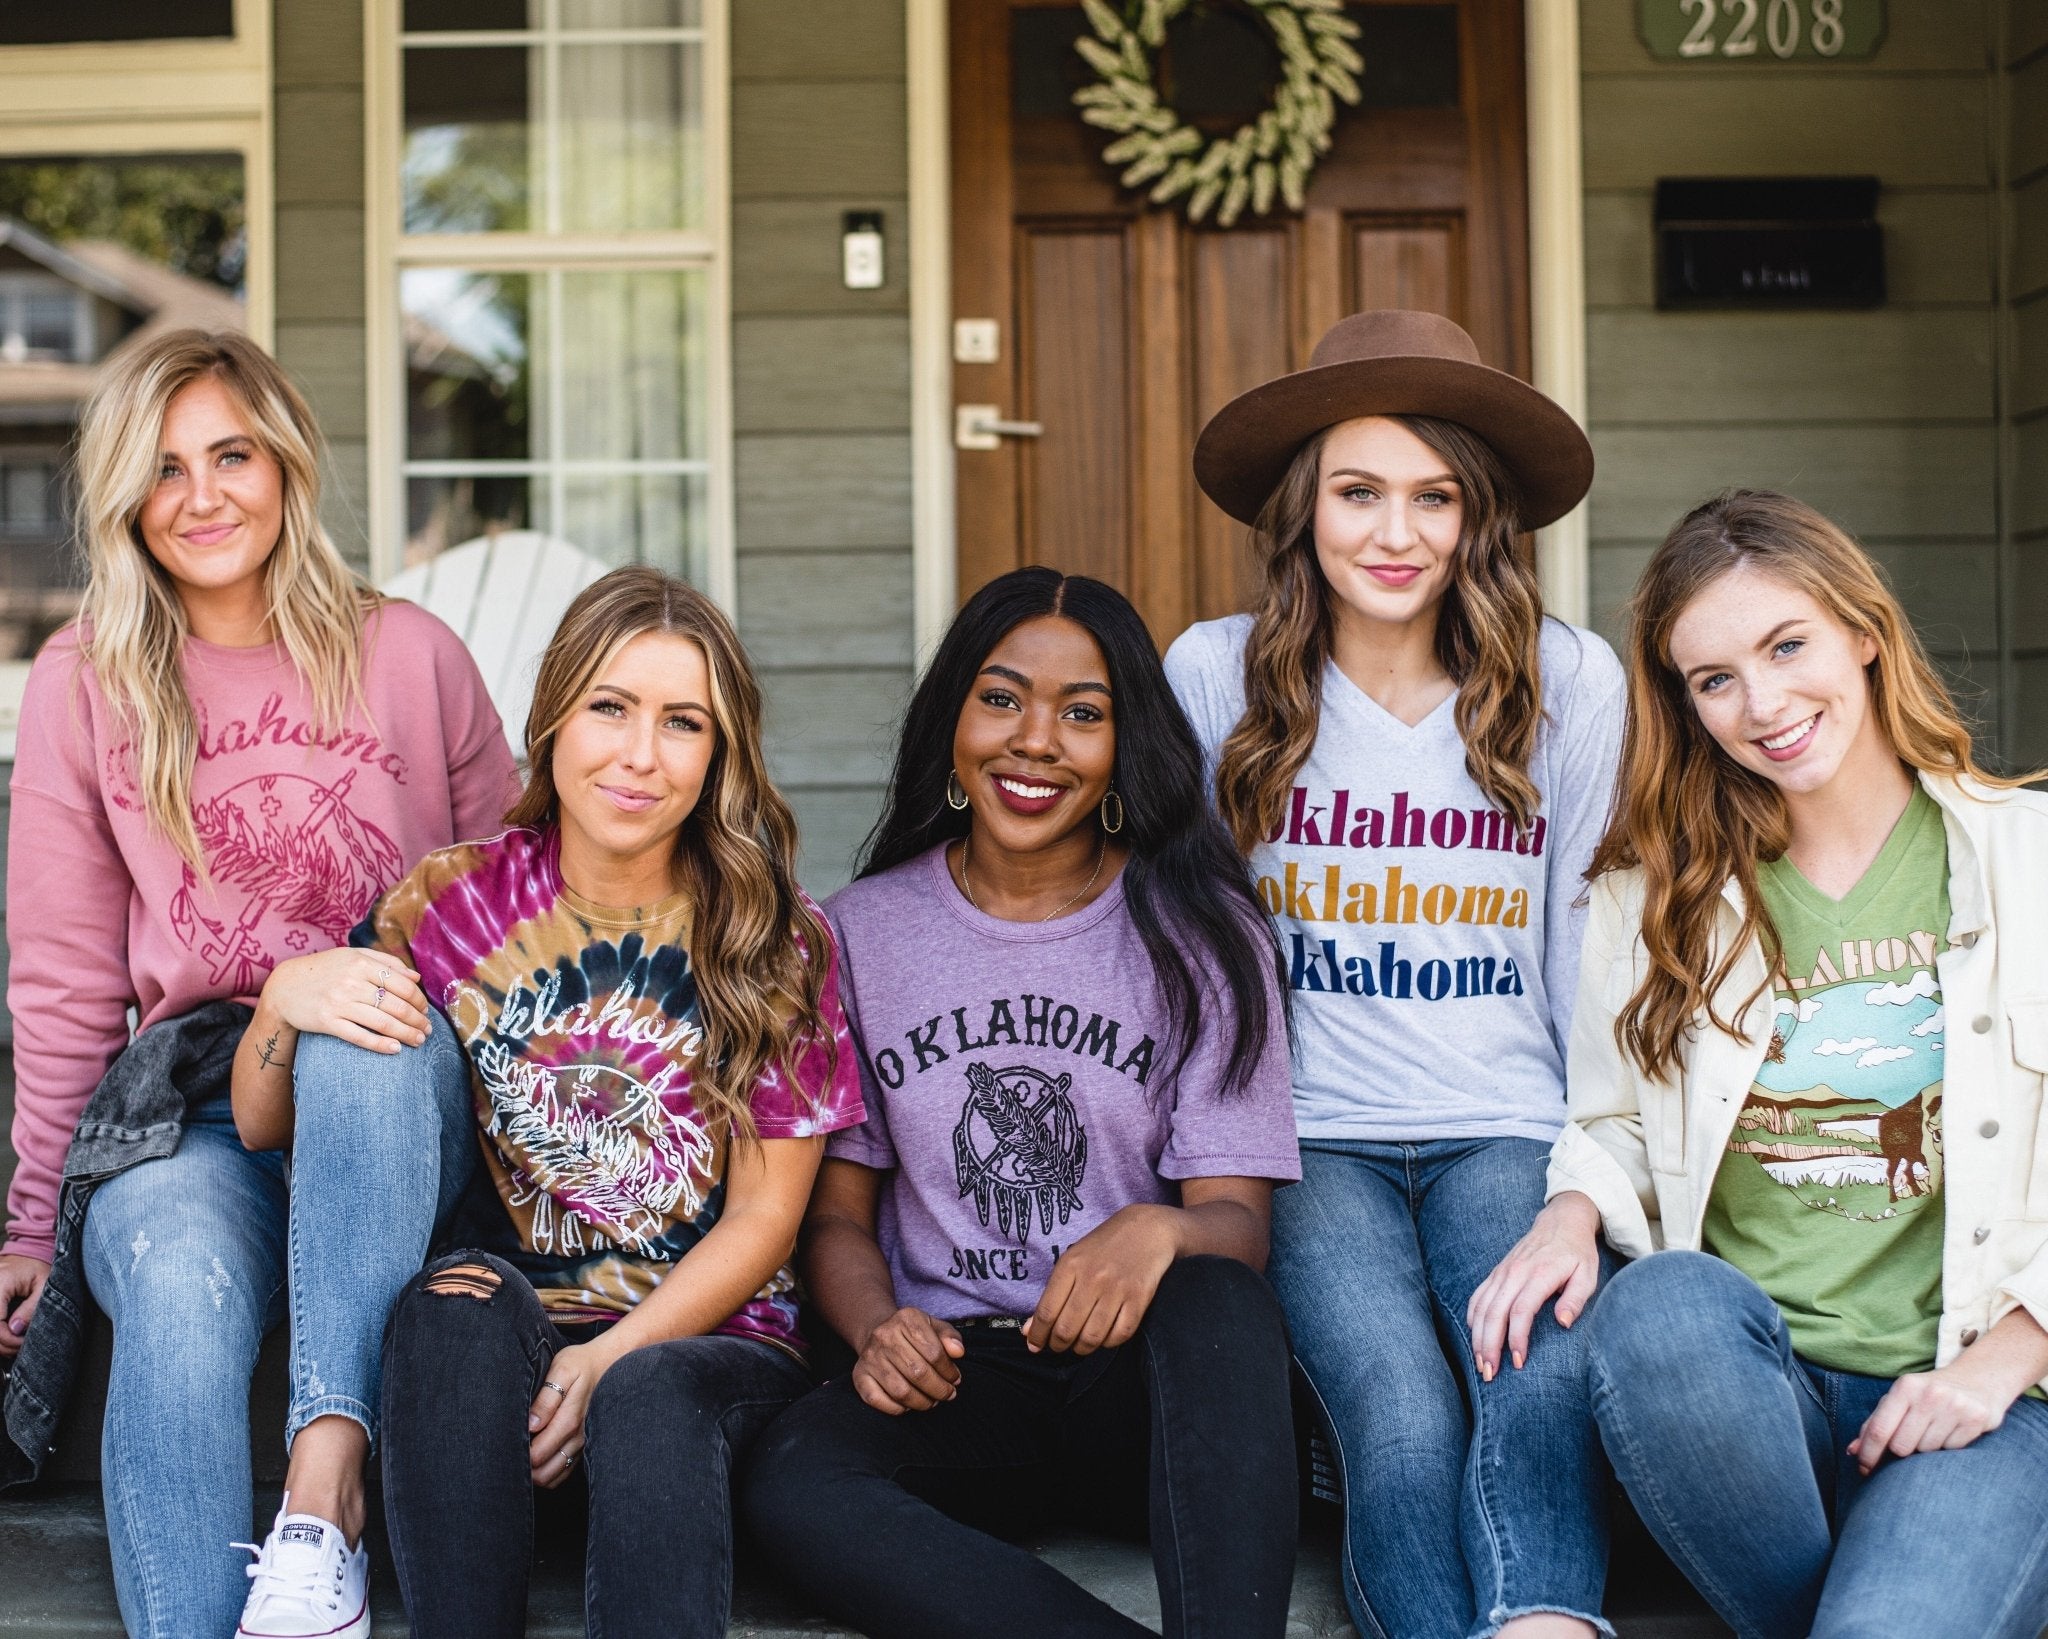 Okie Apparel | Lush Fashion Lounge: Okie t shirt, Okie apparel, Okie shirt, Okie shirt shop, trendy local graphic tees, local Okie clothing, Oklahoma local clothing, locally designed graphic tees in OKC. Models wearing a variety of Okie t-shirts